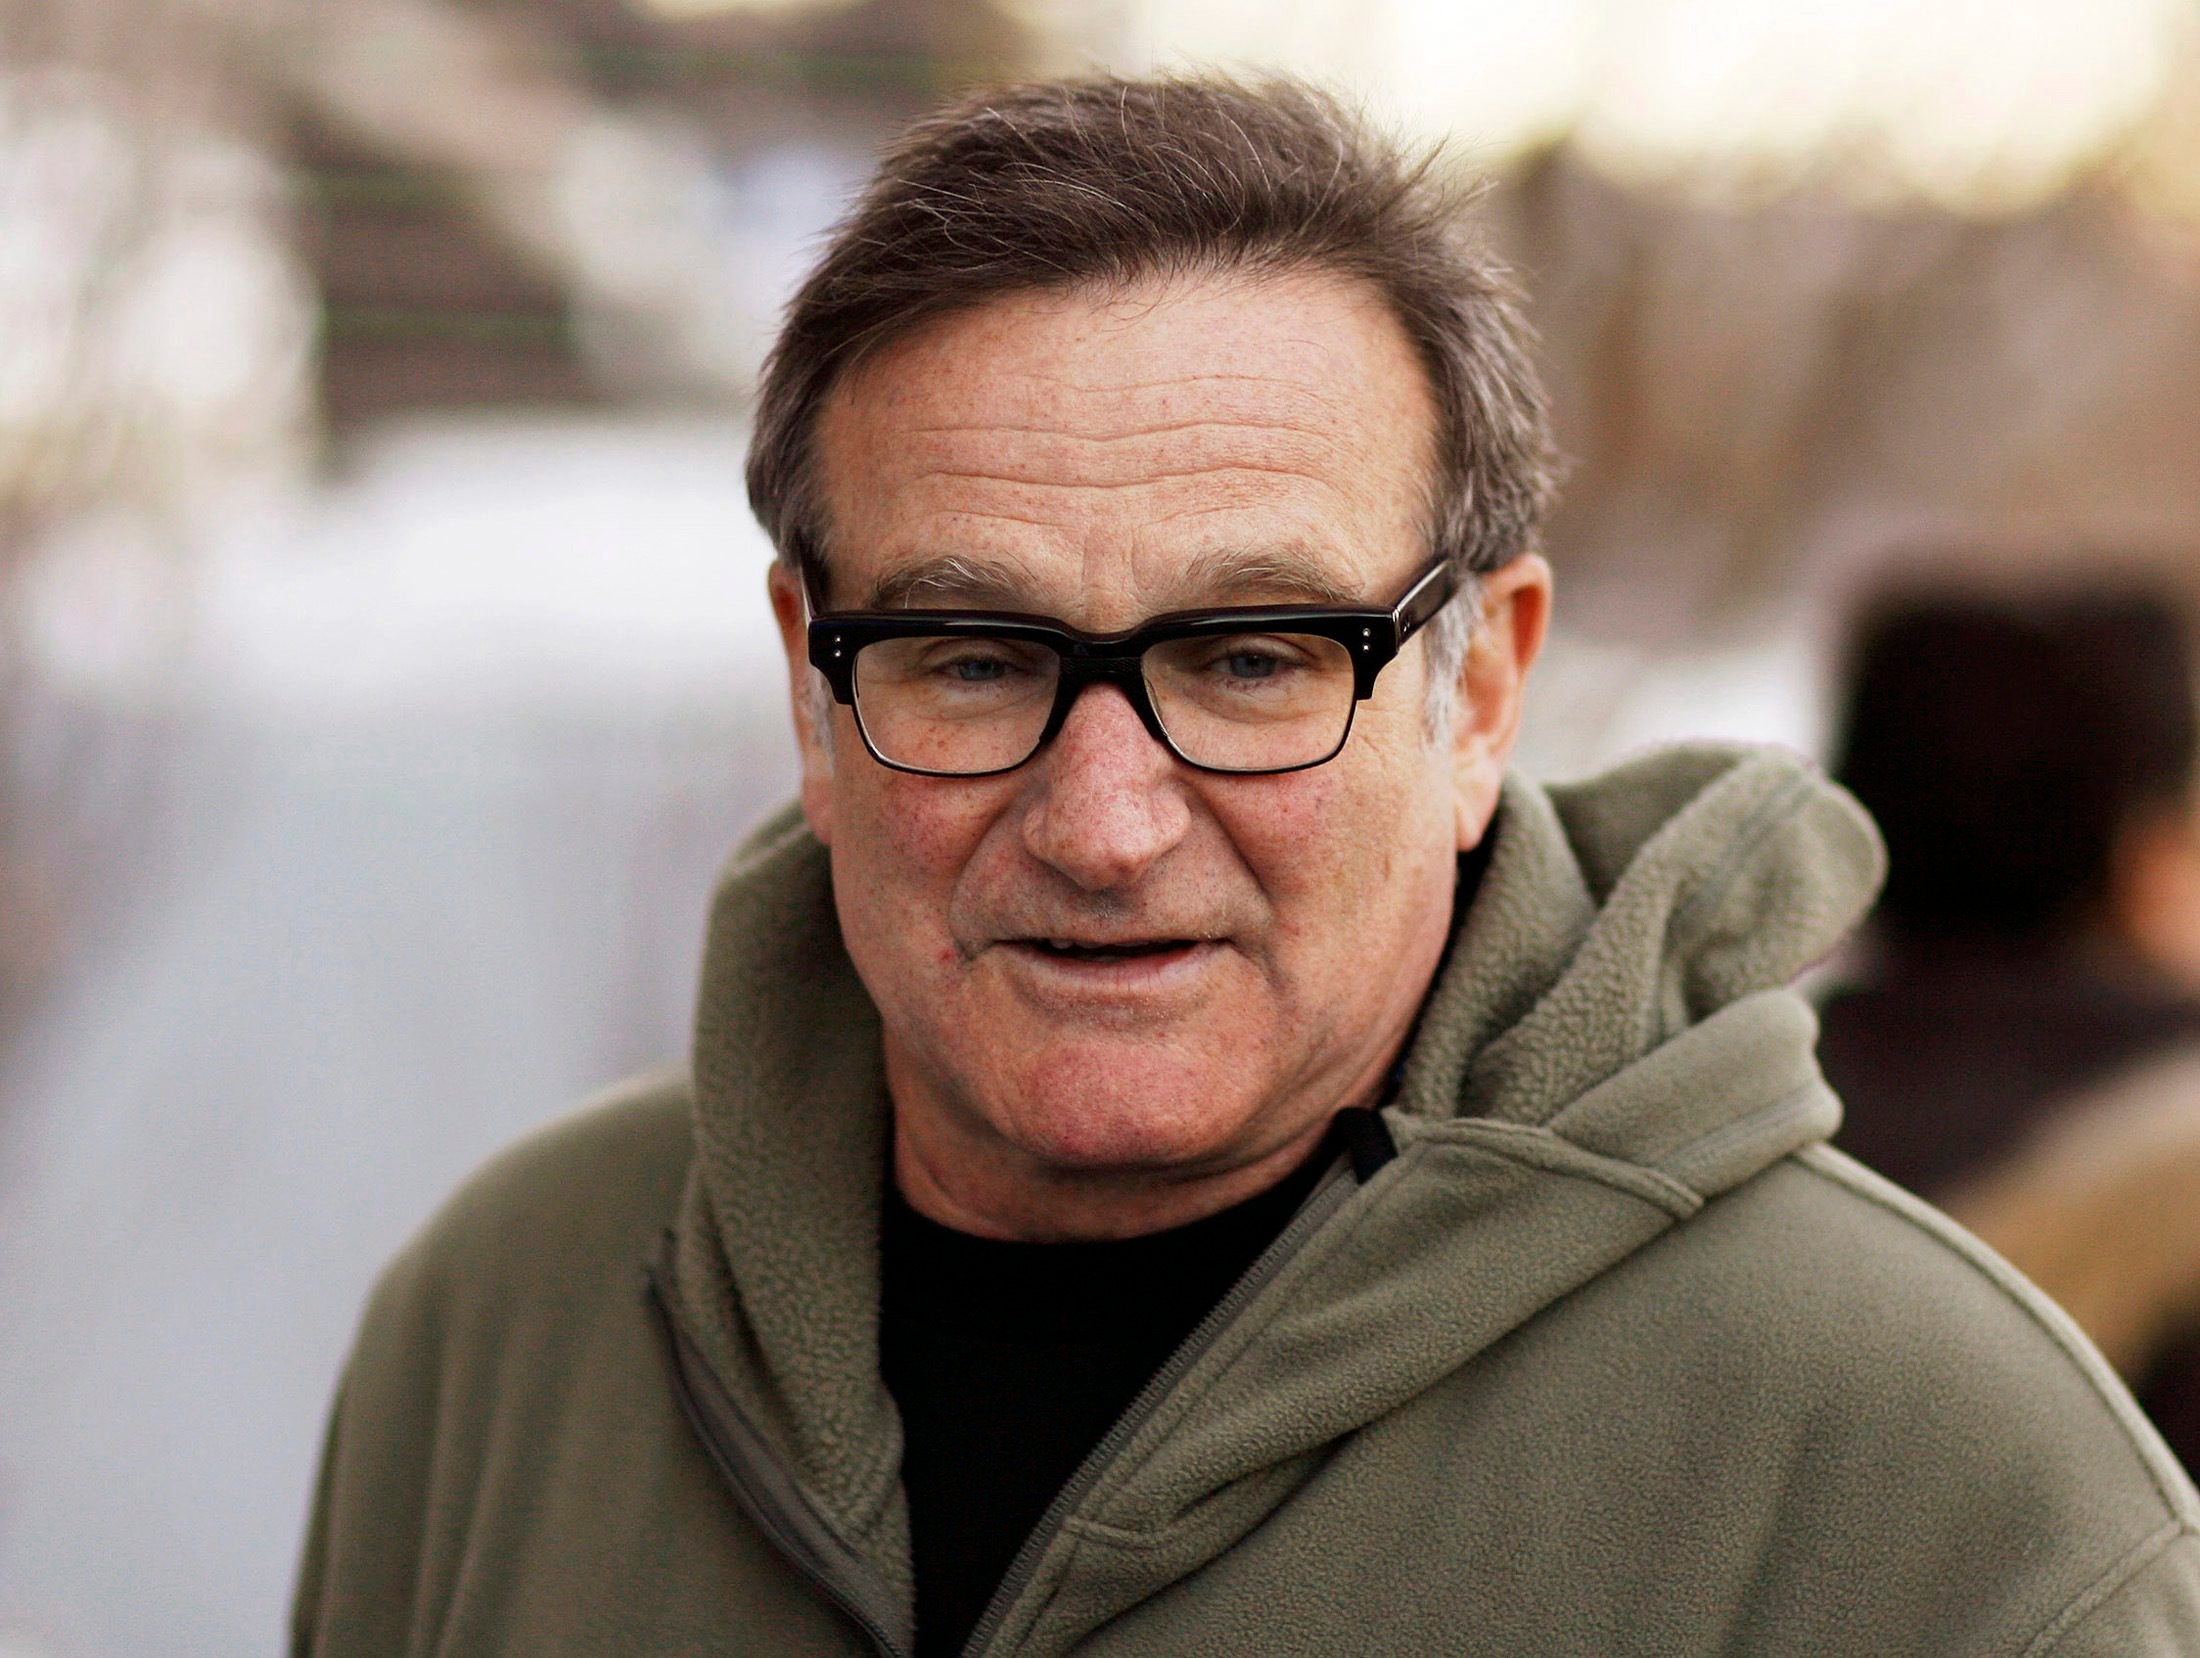 Daniel Hillard, 'Mrs. Doubtfire' – Actor and comedian Robin Williams arrives at the premiere of the film 'World's Greatest Dad' during the Sundance Film Festival in Park City, Utah, Jan. 18, 2009. (Reuters Photo)